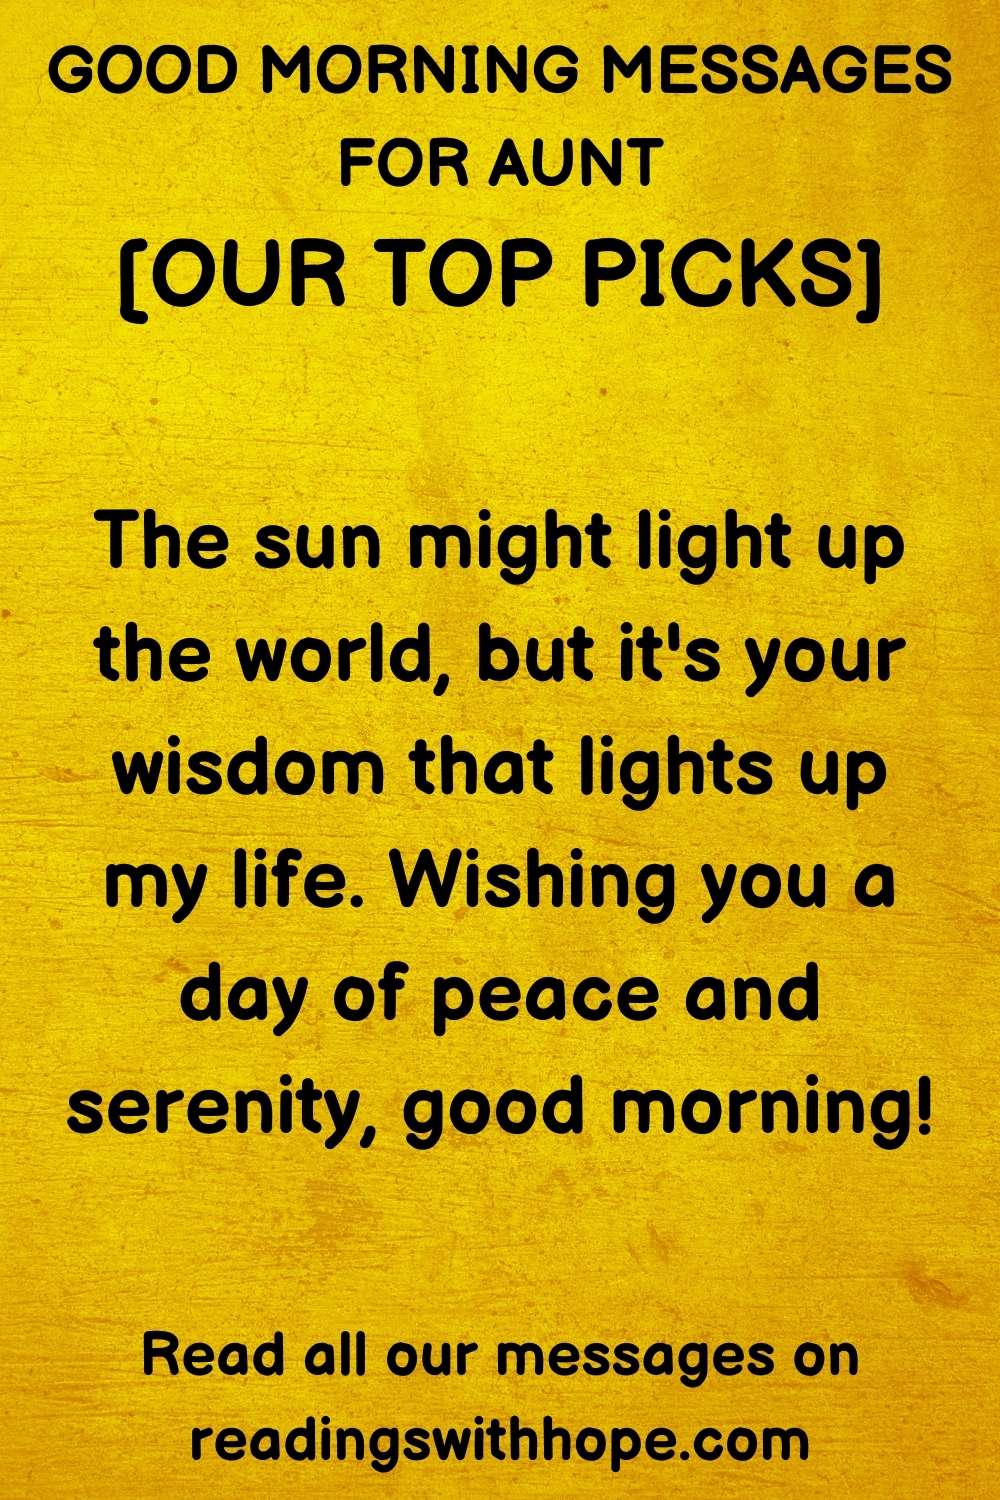 good morning message for aunt that says The sun might light up the world, but it's your wisdom that lights up my life. Wishing you a day of peace and serenity, good morning!